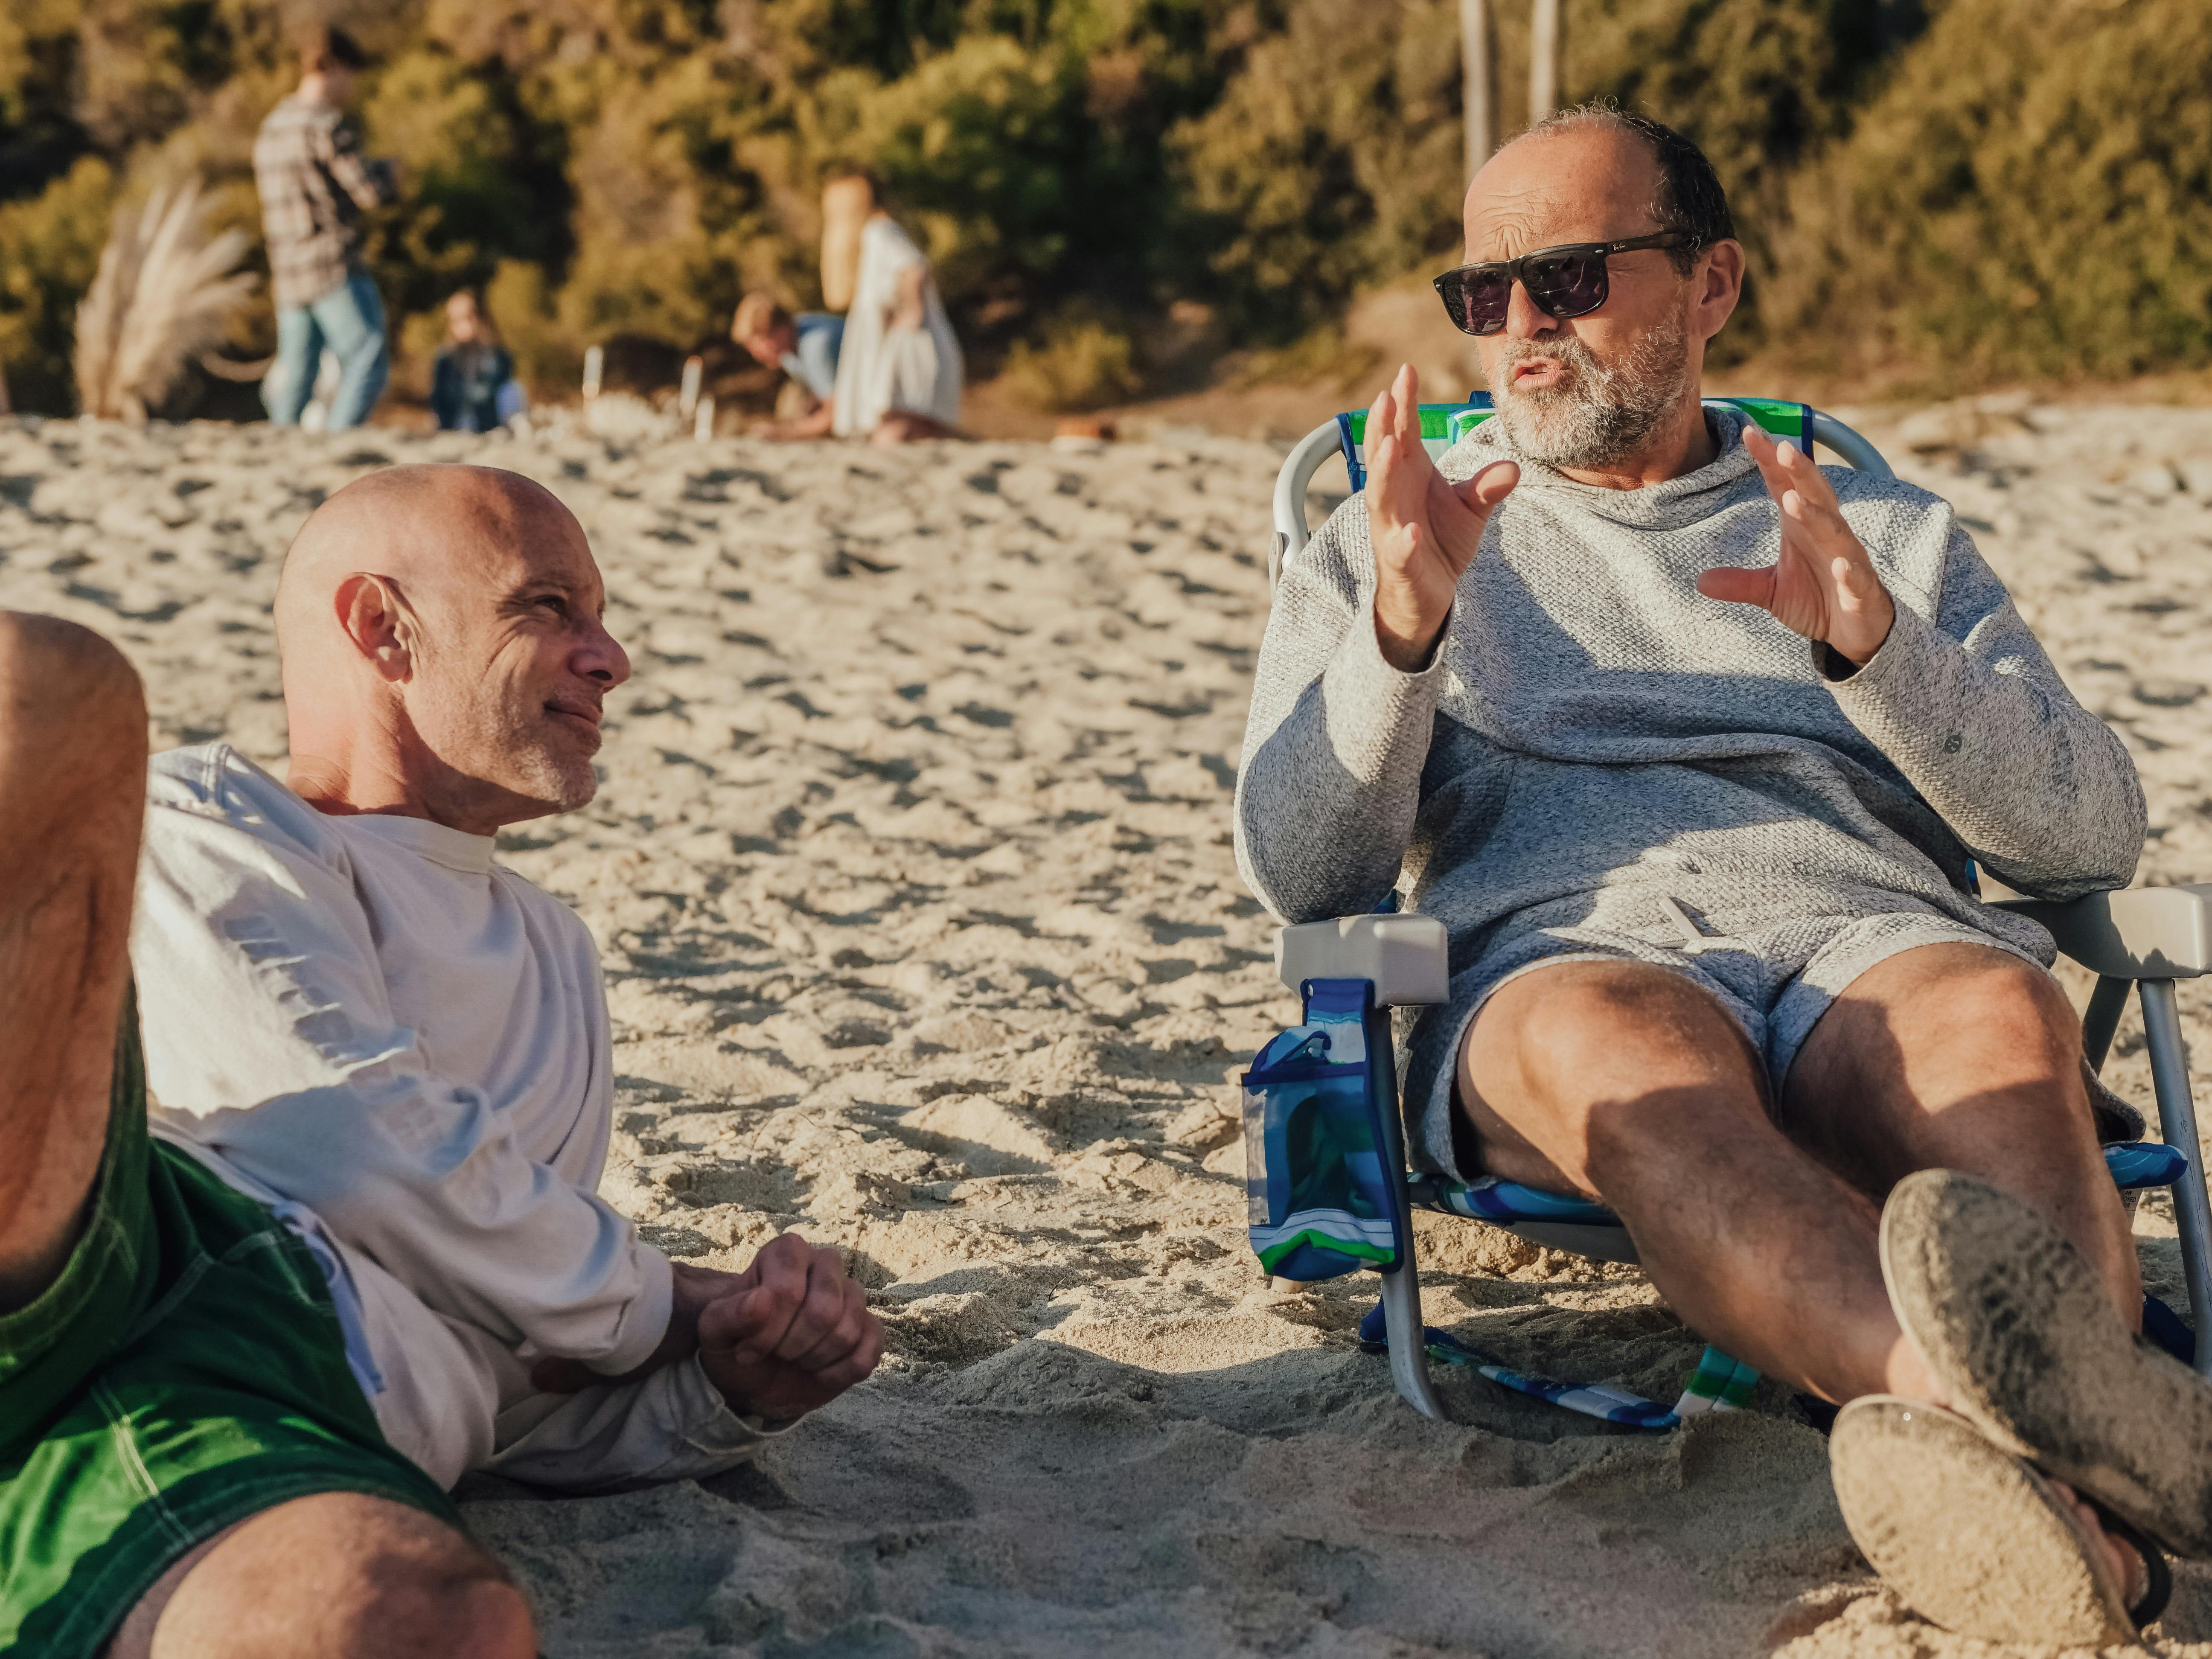 A middle-aged man boasting about something to another man at the beach | Source: Pexels